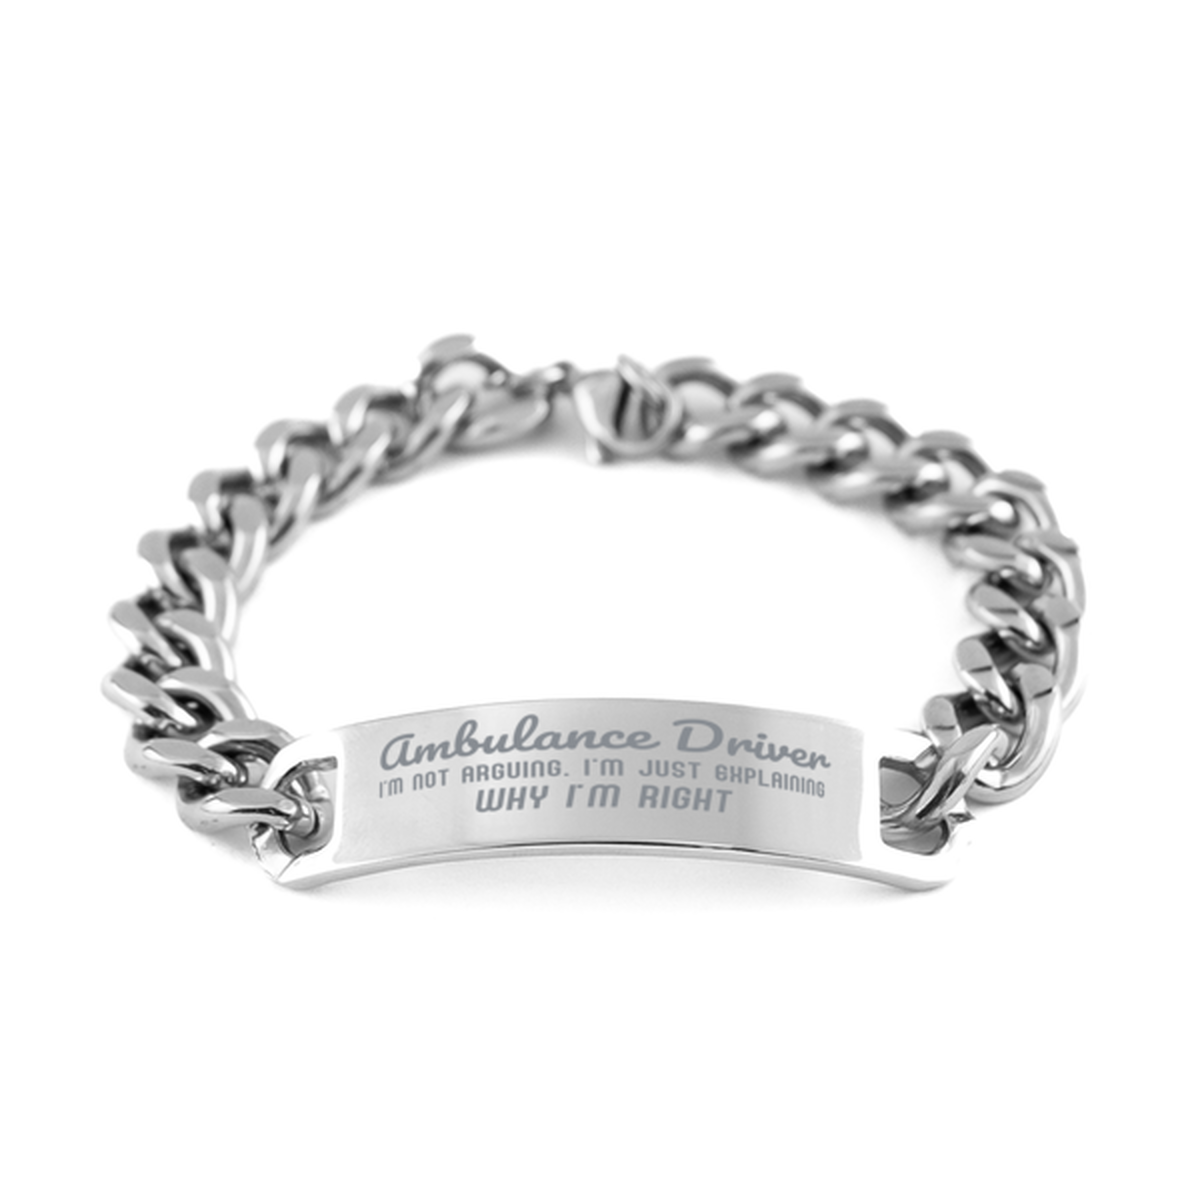 Ambulance Driver I'm not Arguing. I'm Just Explaining Why I'm RIGHT Cuban Chain Stainless Steel Bracelet, Graduation Birthday Christmas Ambulance Driver Gifts For Ambulance Driver Funny Saying Quote Present for Men Women Coworker